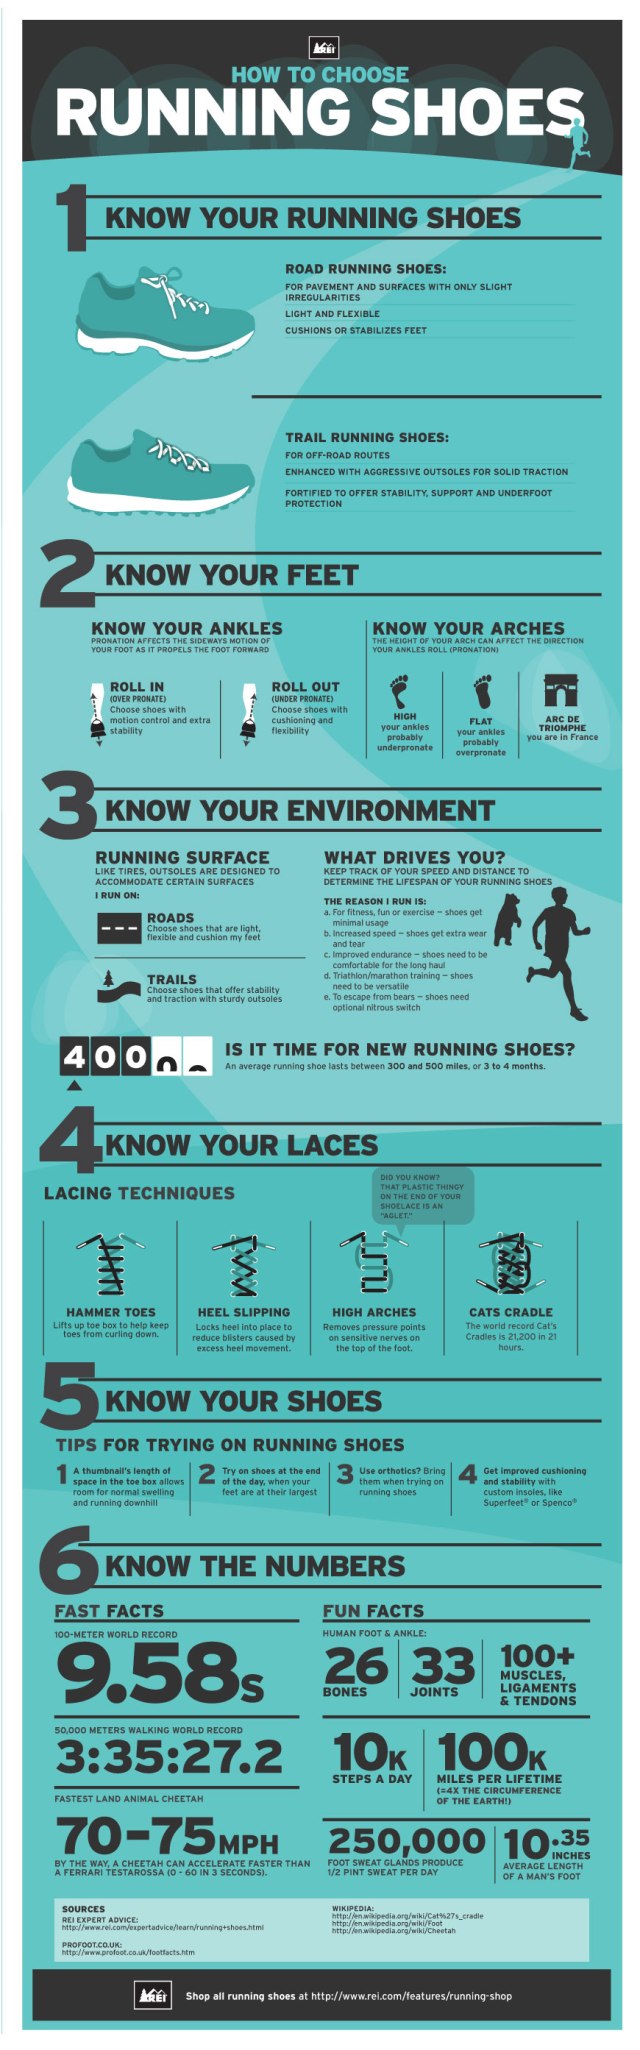 running-shoes-infographic